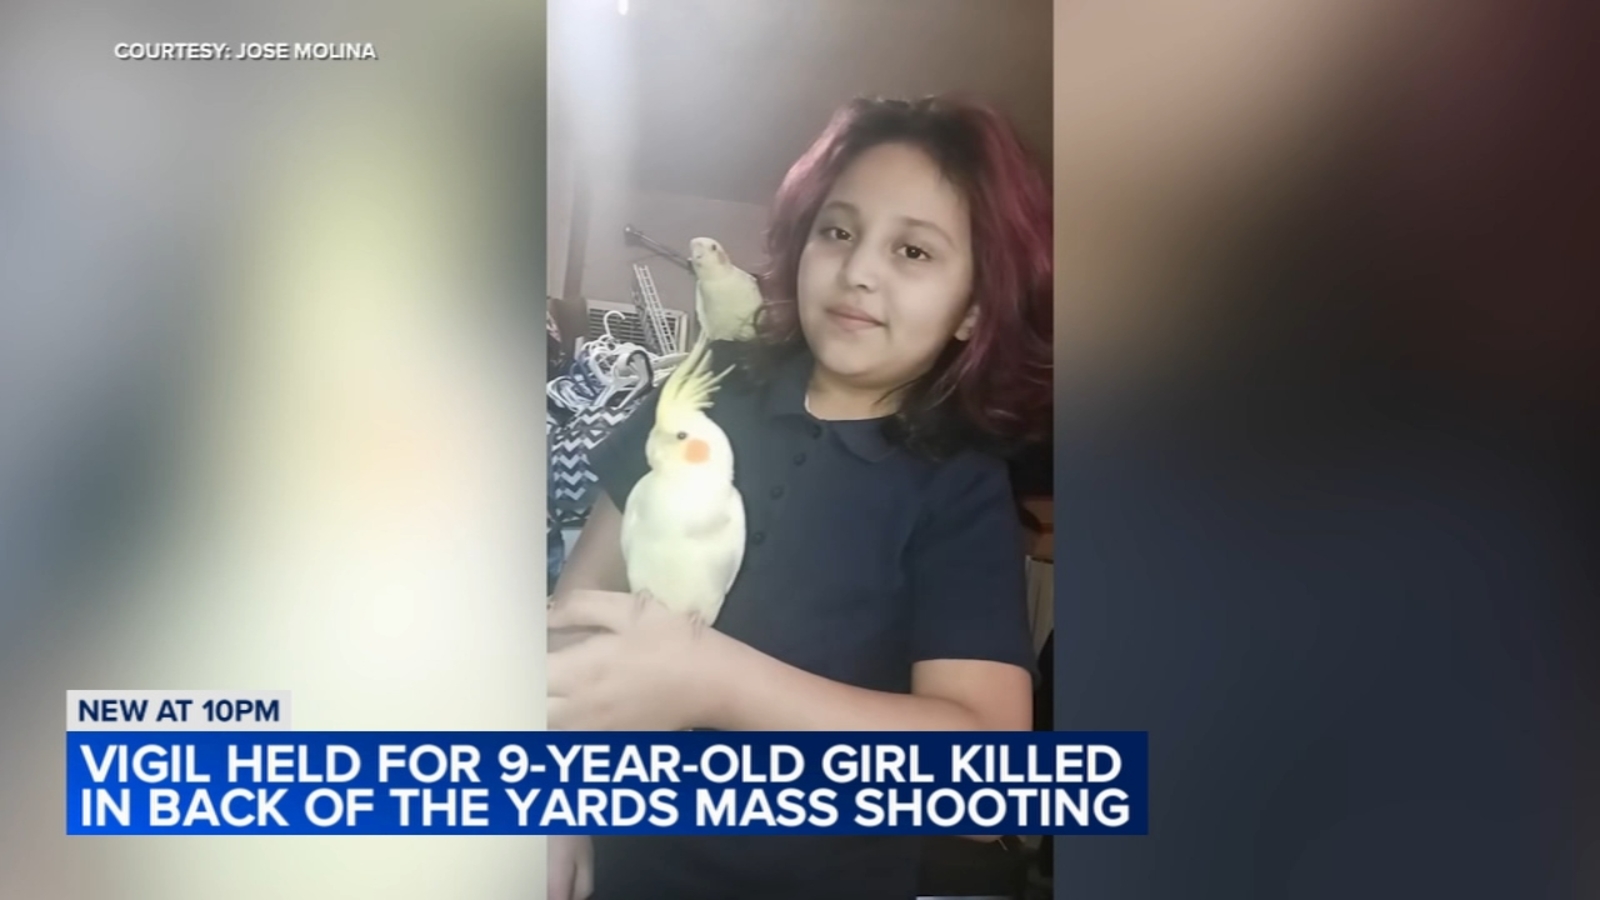 Mass shooting Chicago: Vigil held after Back of the Yards shooting kills 9-year-old Ariana Molina; 10 others hurt [Video]